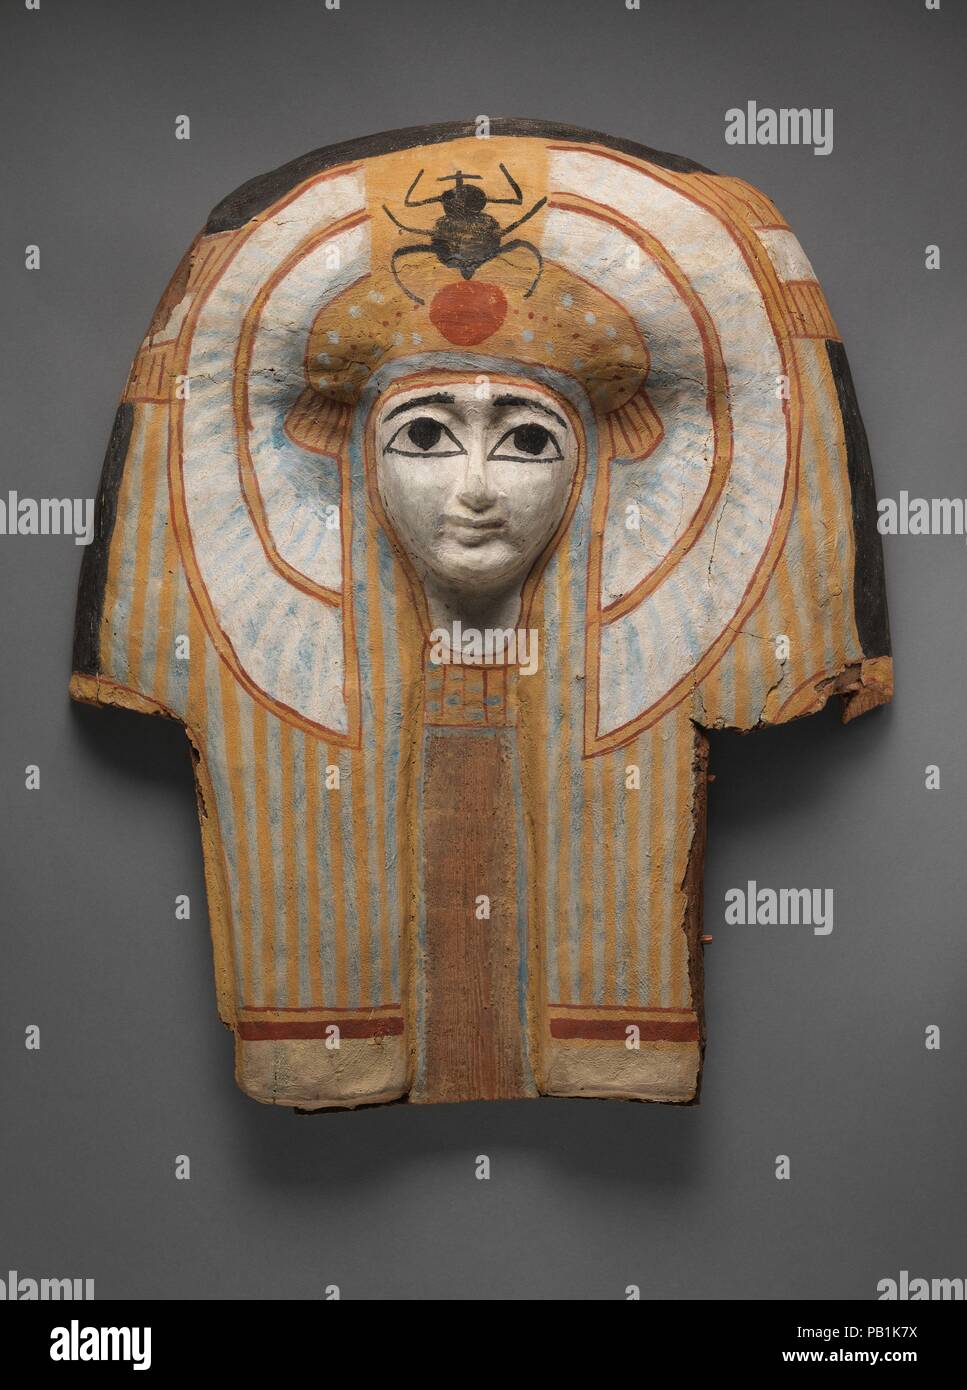 Face of a coffin. Dimensions: H. 58.3 × W. 51 cm (22 15/16 × 20 1/16 in.). Dynasty: Dynasty 22-24. Date: ca. 945-712 BC. Museum: Metropolitan Museum of Art, New York, USA. Stock Photo